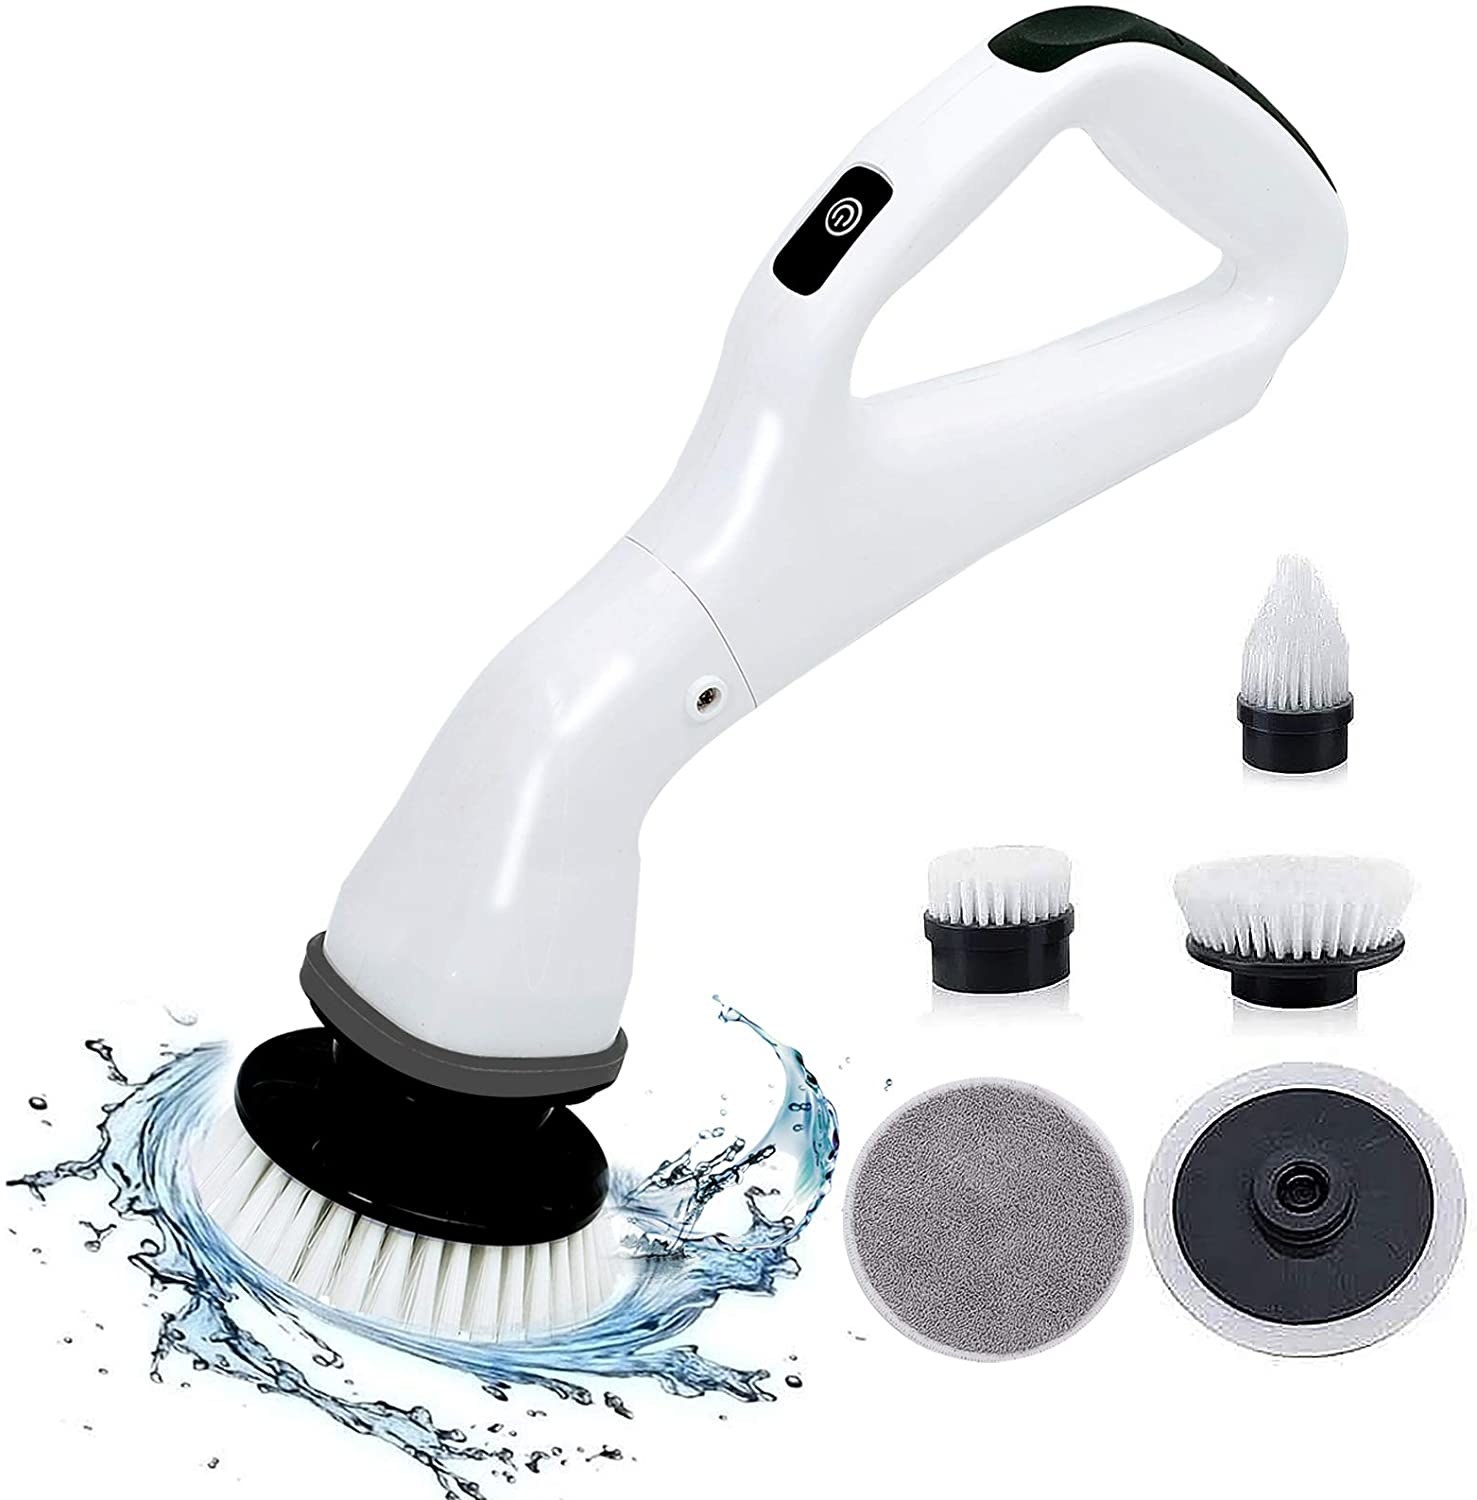 Electric Spin Scrubber, LOSUY Cordless Cleaning Brush with 7 Replaceable Drill B